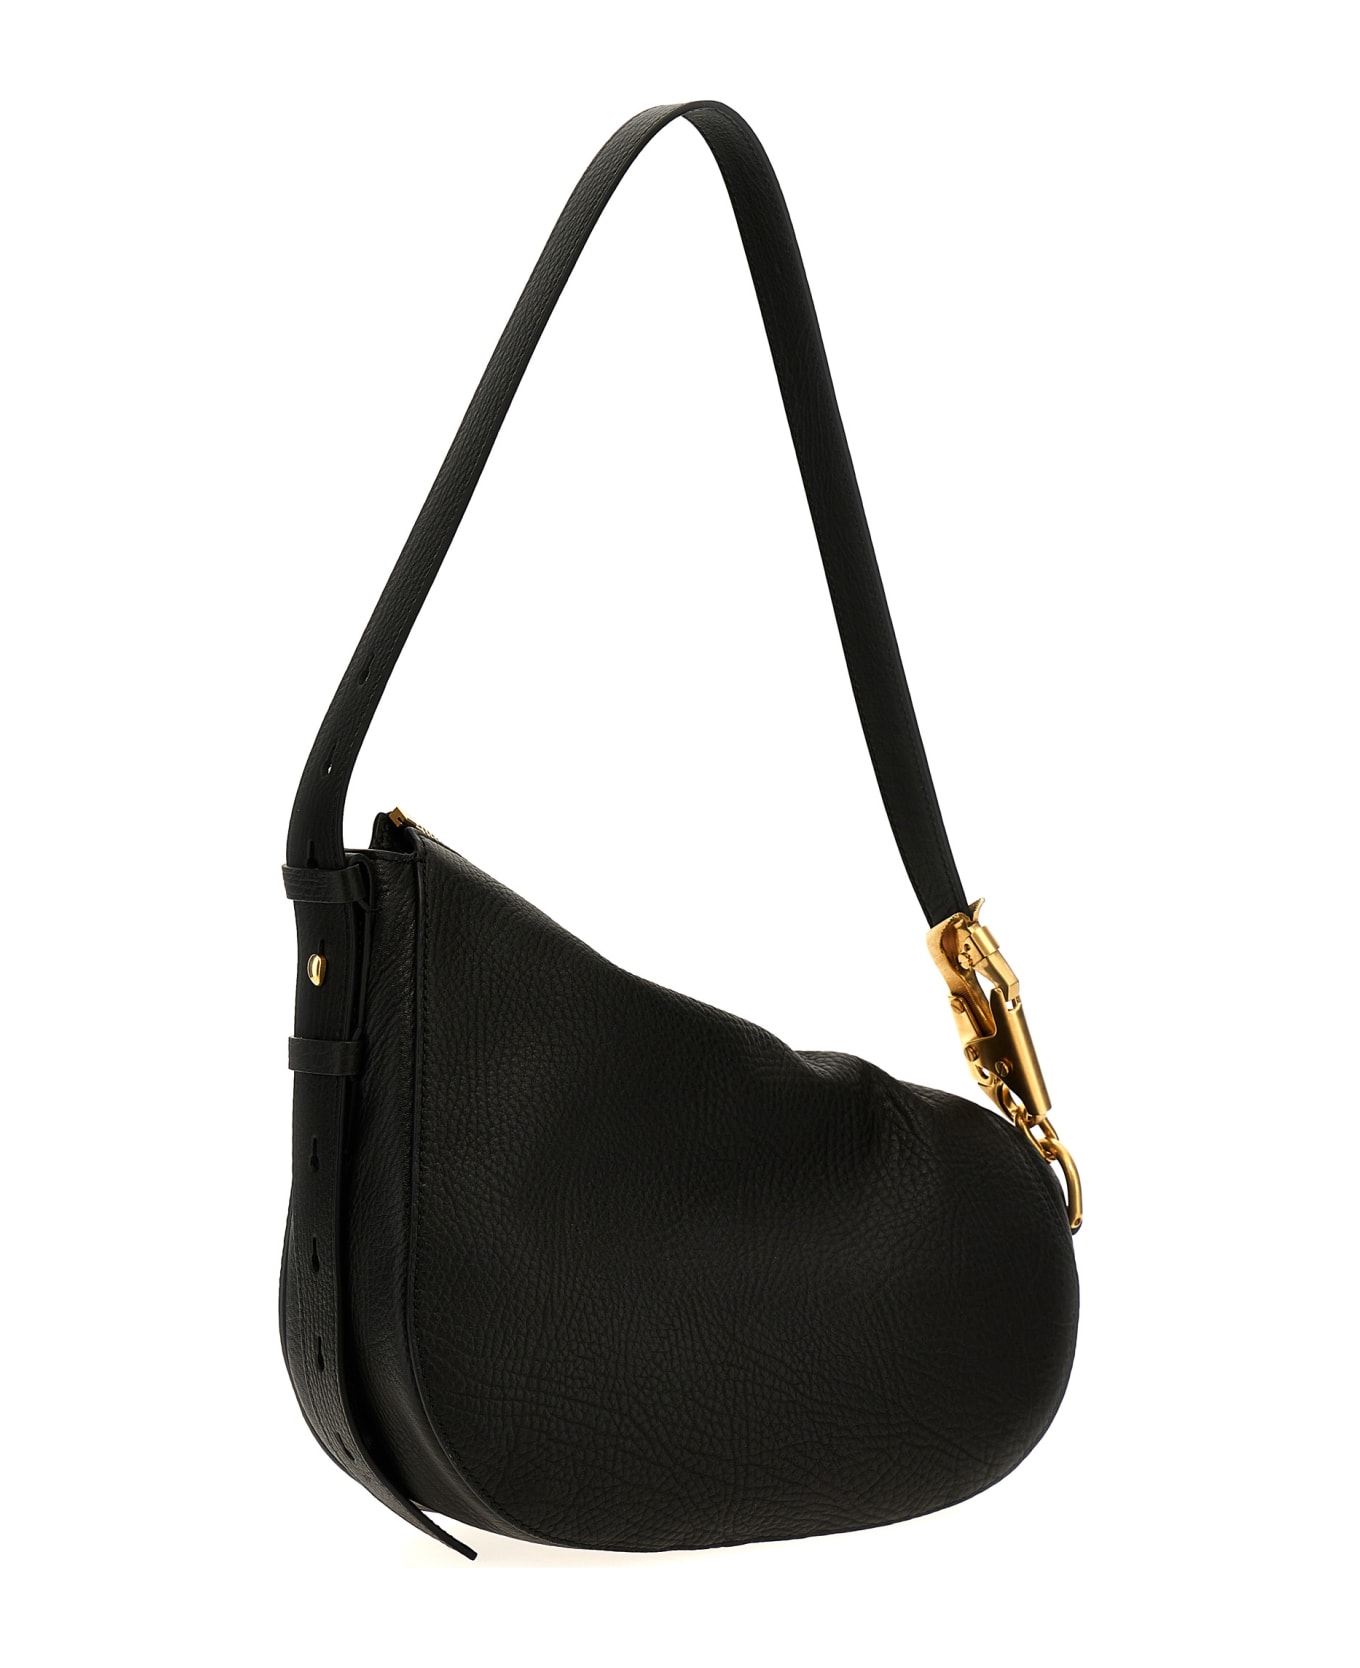 Burberry Small Knight Bag - Black トートバッグ